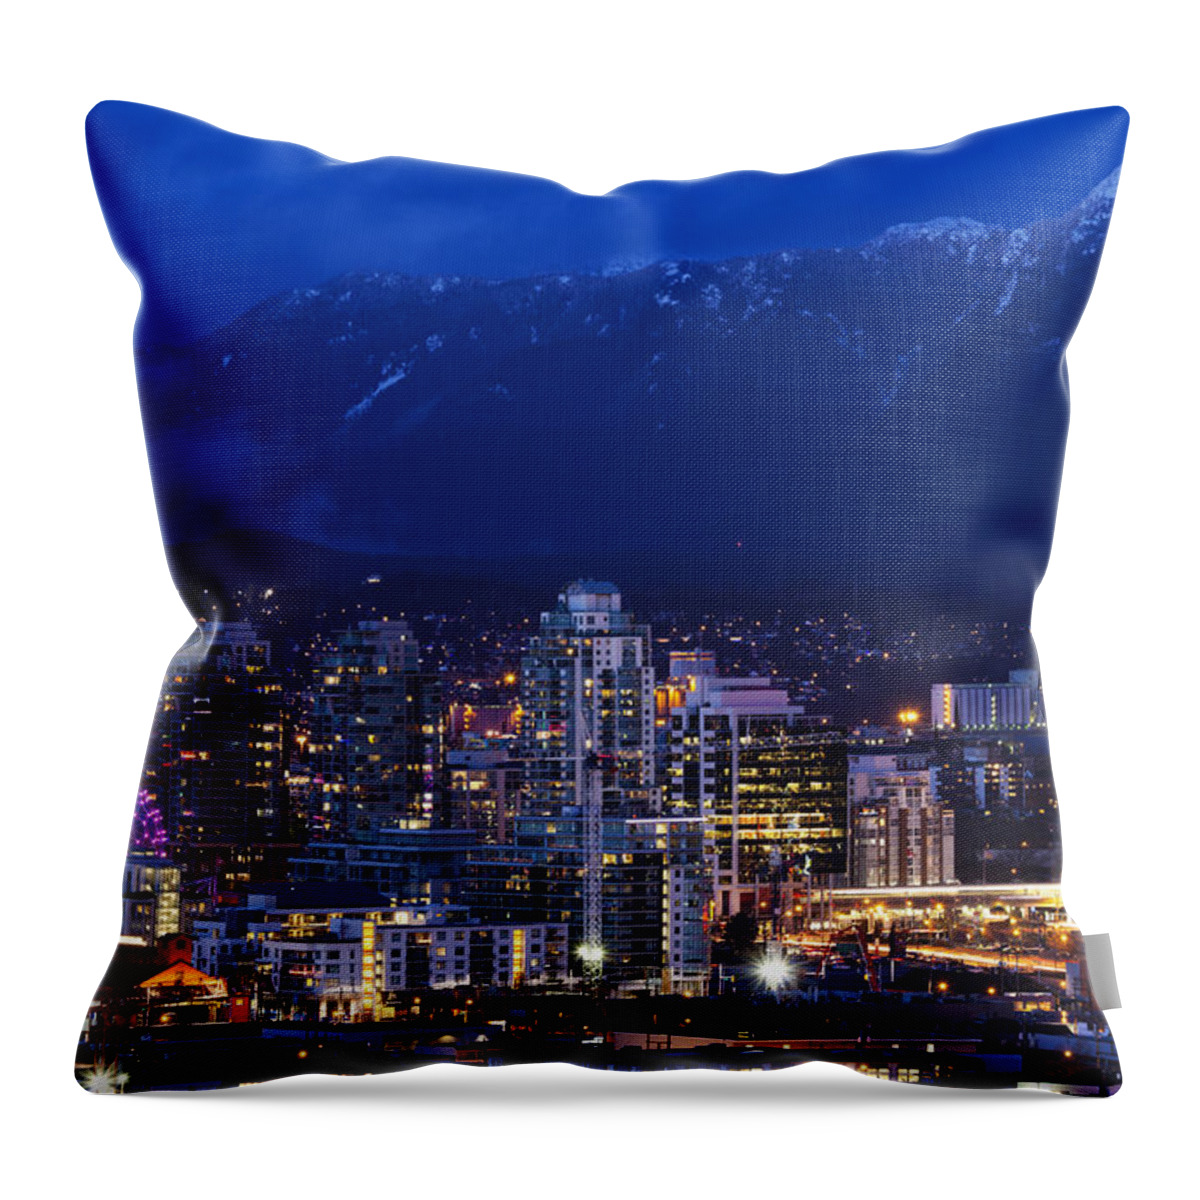 Outdoors Throw Pillow featuring the photograph City View With Science World by Walter Bibikow